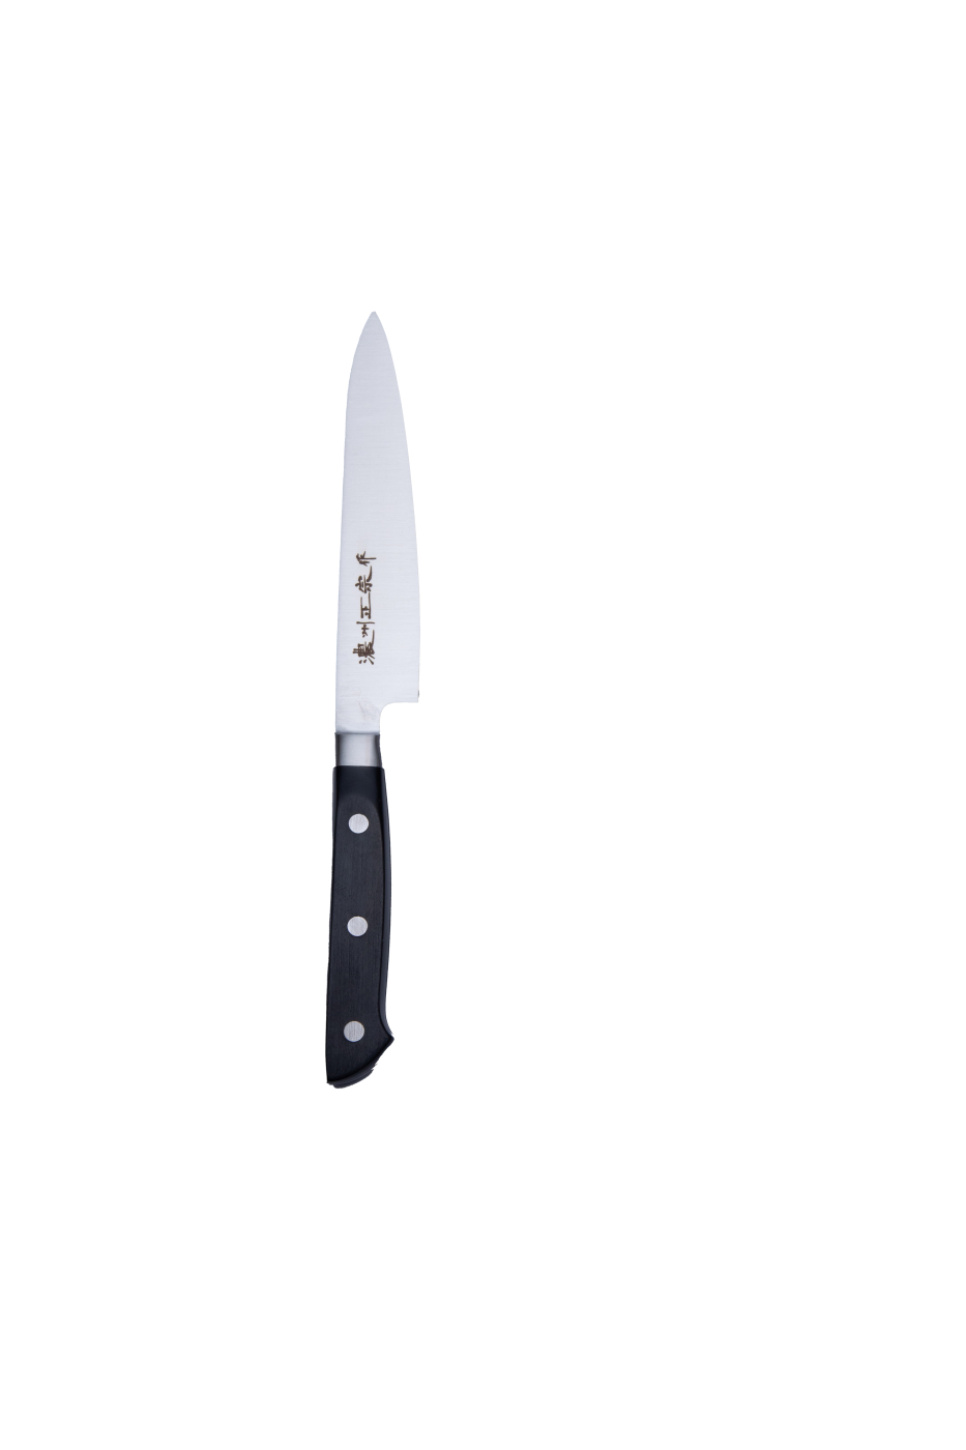 Petty 13.5cm - Pro House in the group Cooking / Kitchen knives / Paring knives at KitchenLab (1450-27644)